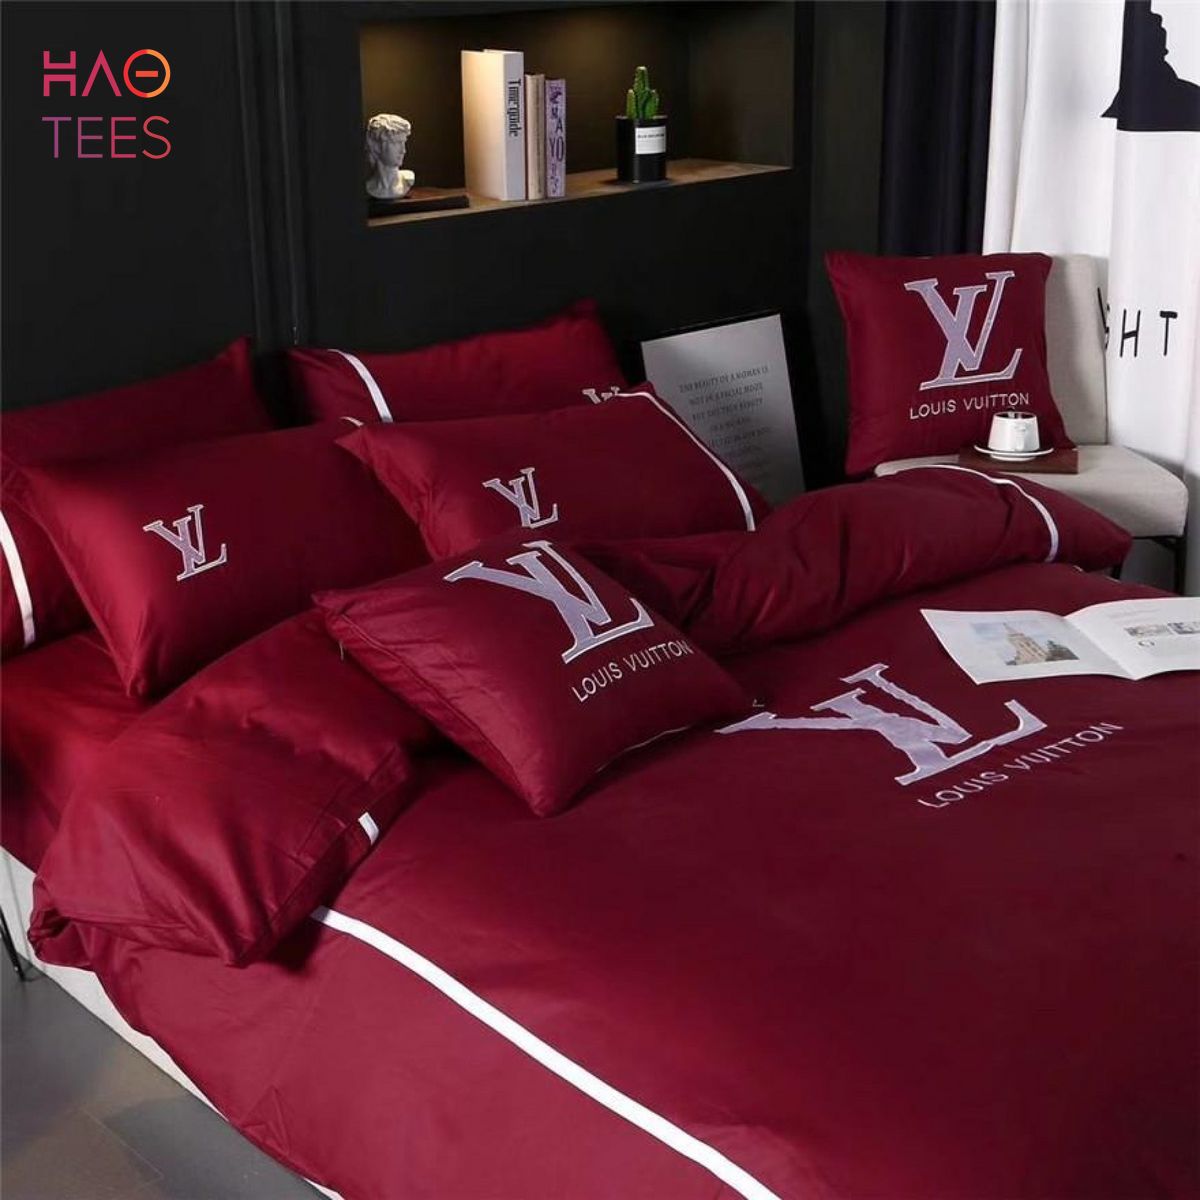 NEW LV Embroidery Duvet Cover Bedding Sets